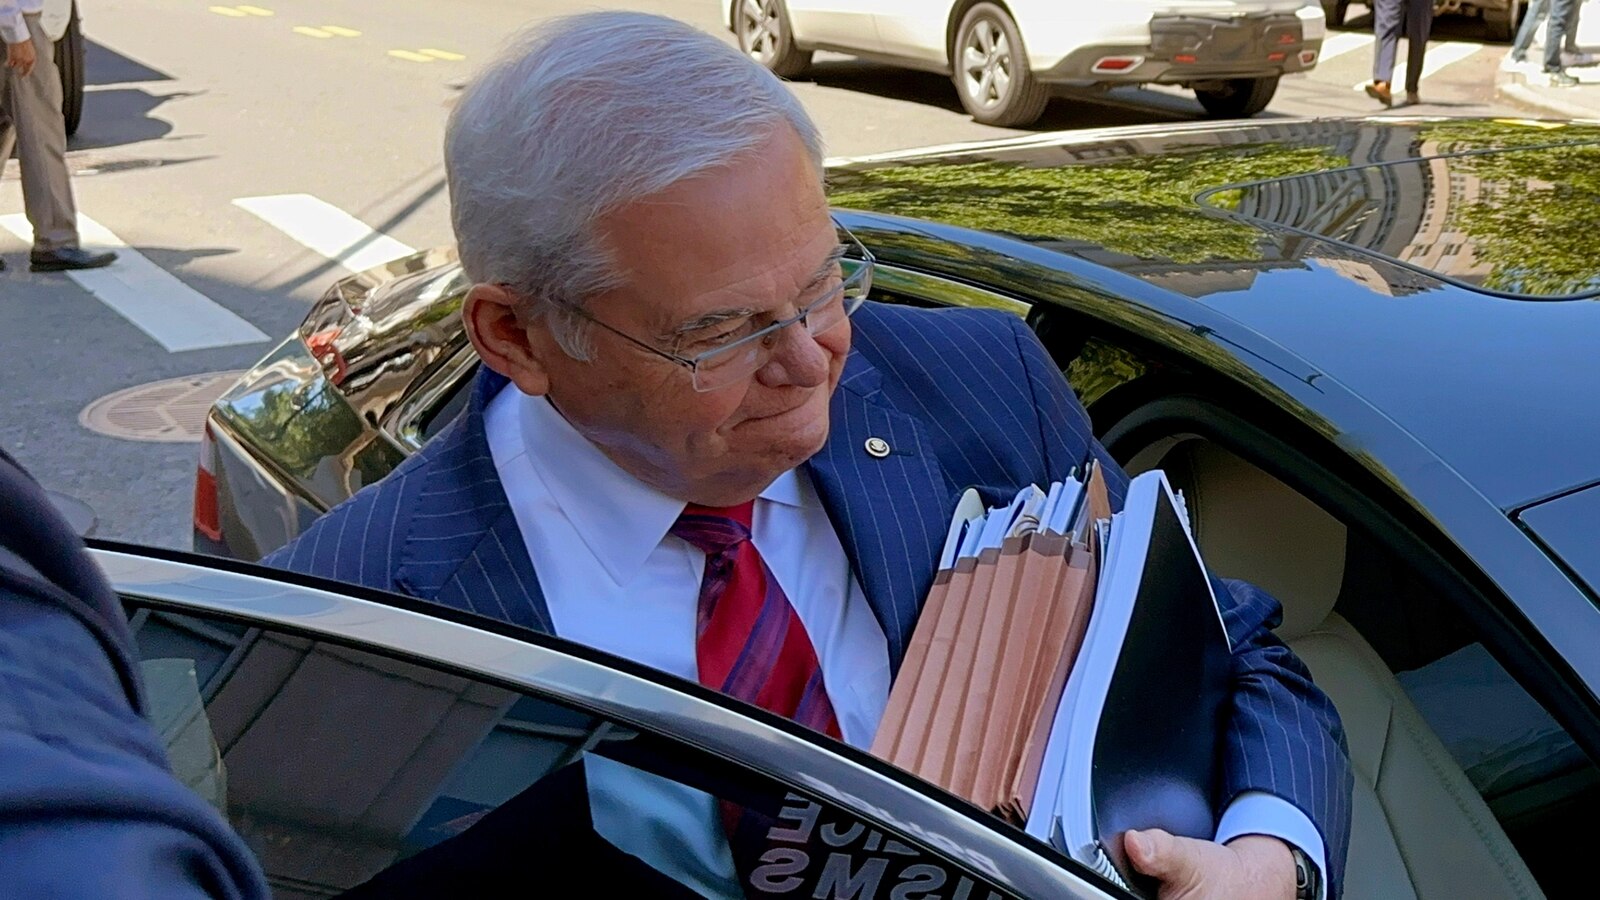 Prosecutors in Sen. Bob Menendez's bribery trial are done presenting their case. The defense is next